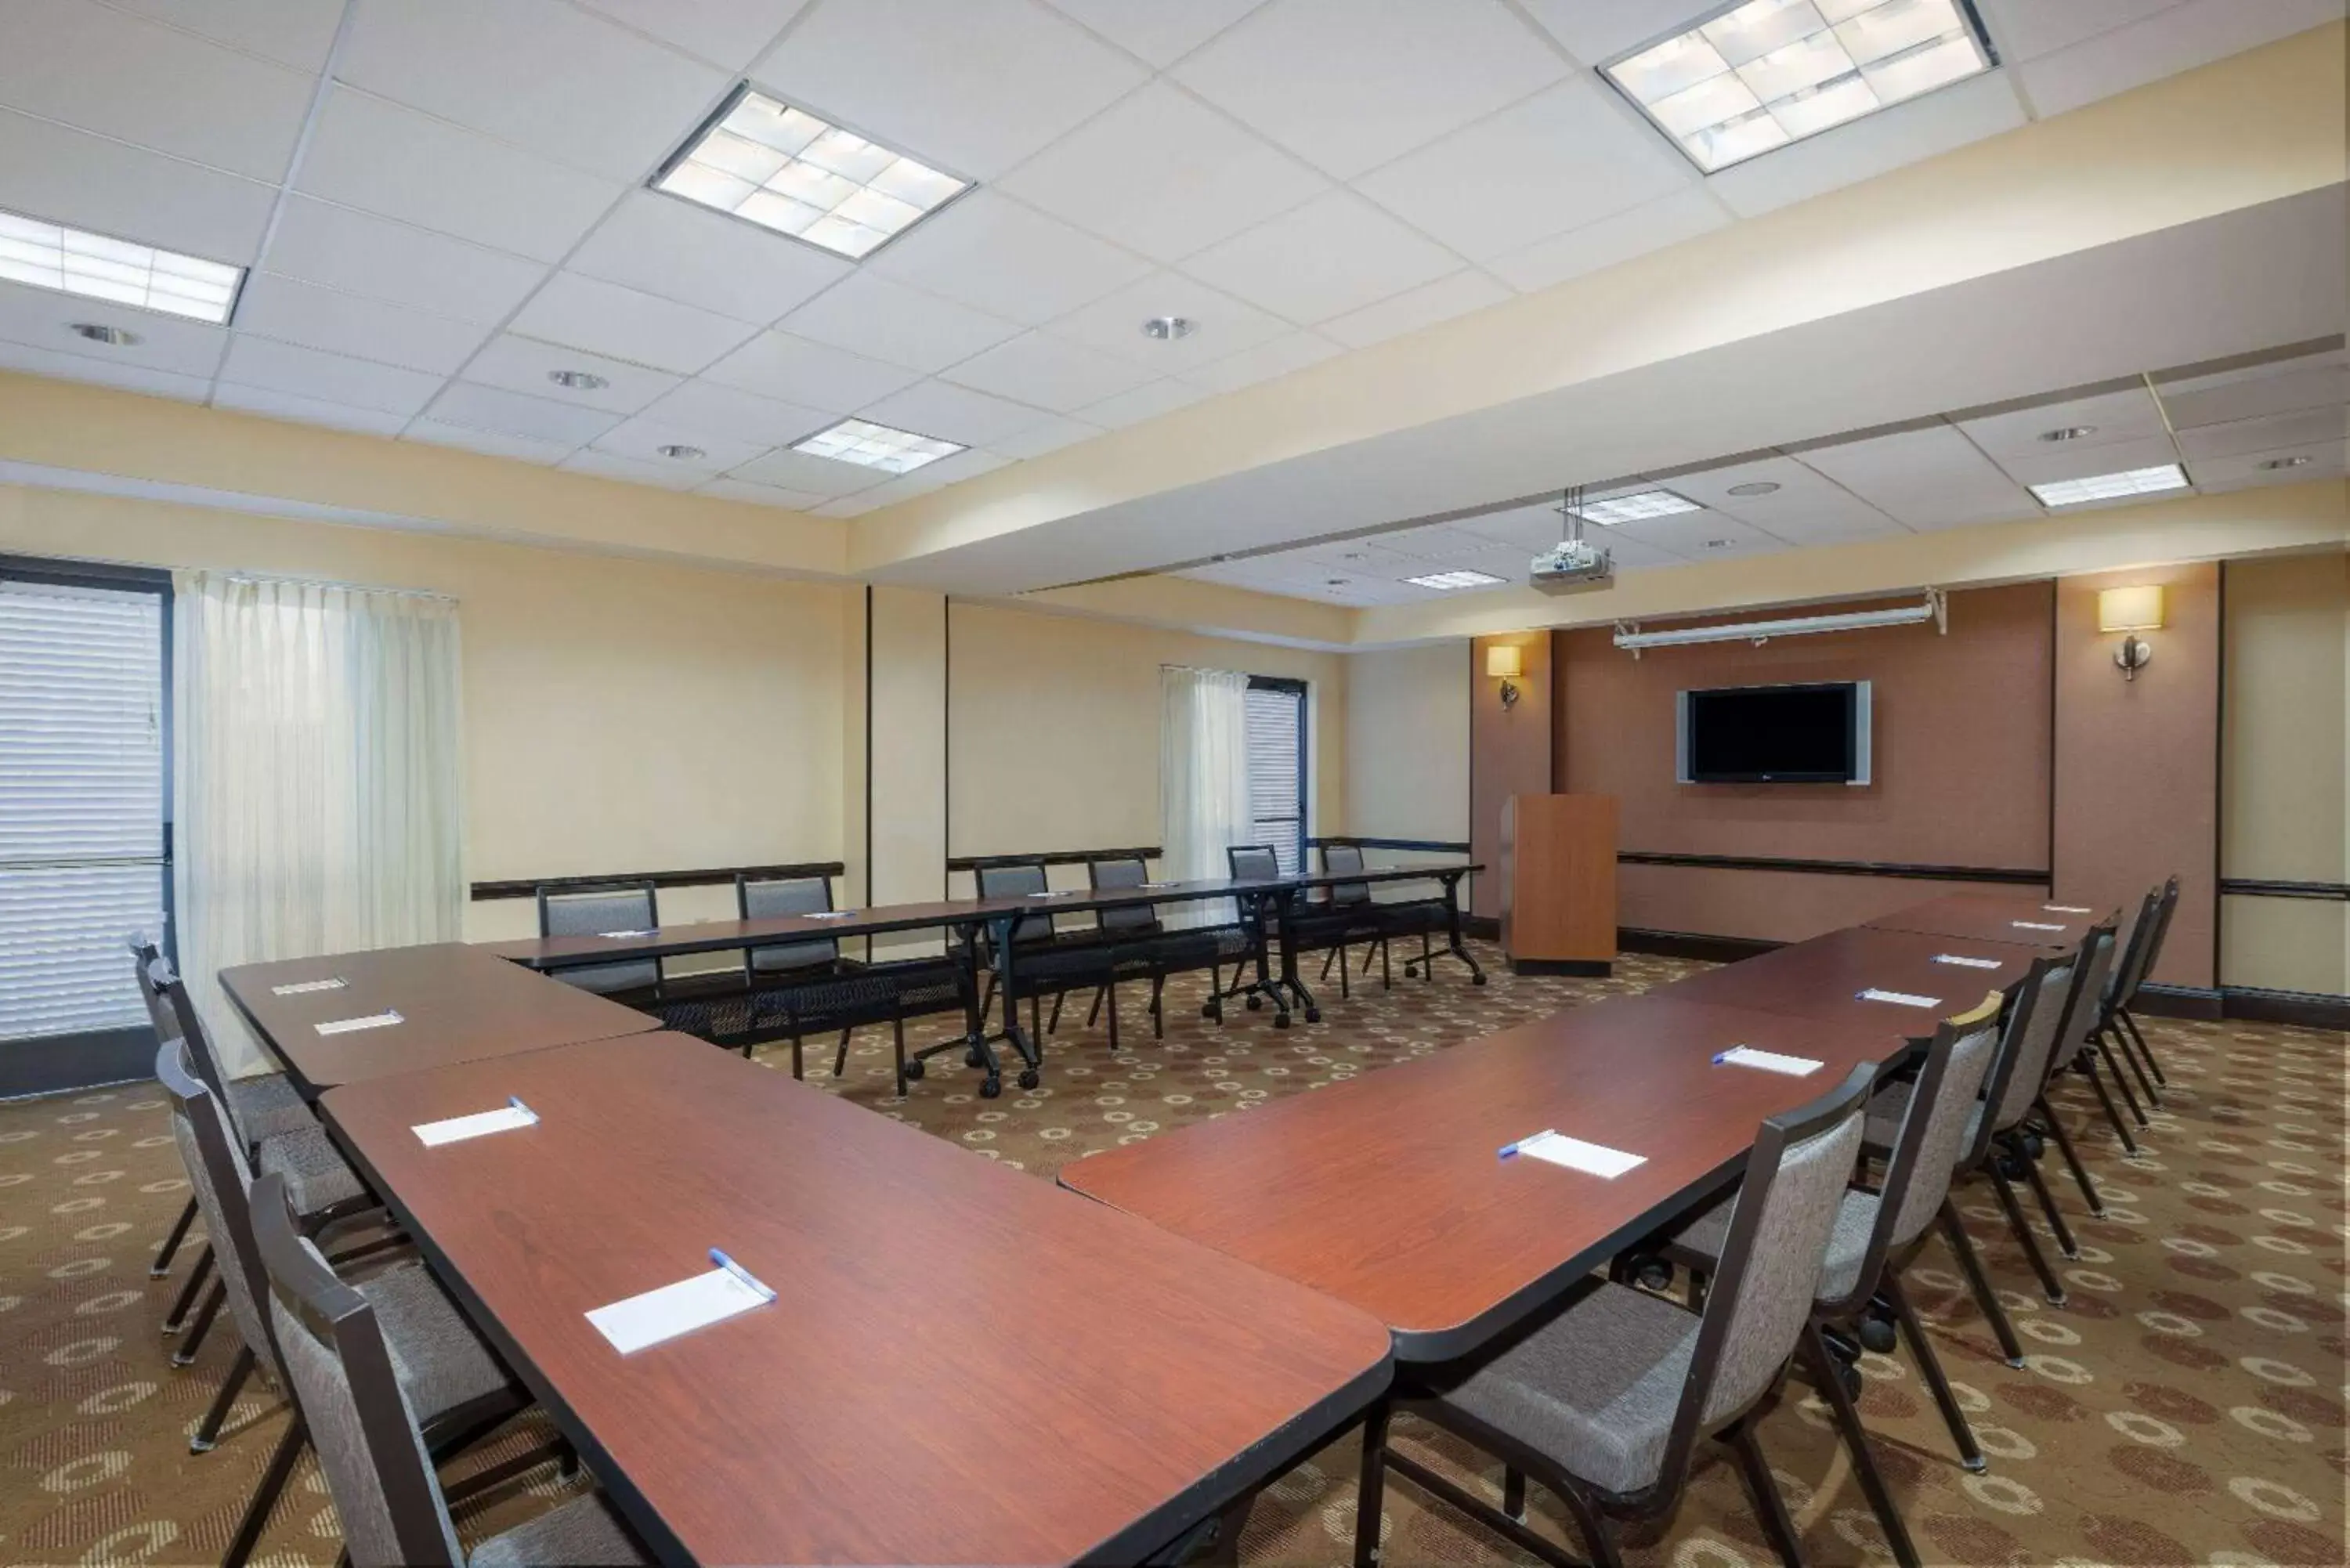 Meeting/conference room in Wyndham Garden Kansas City Airport